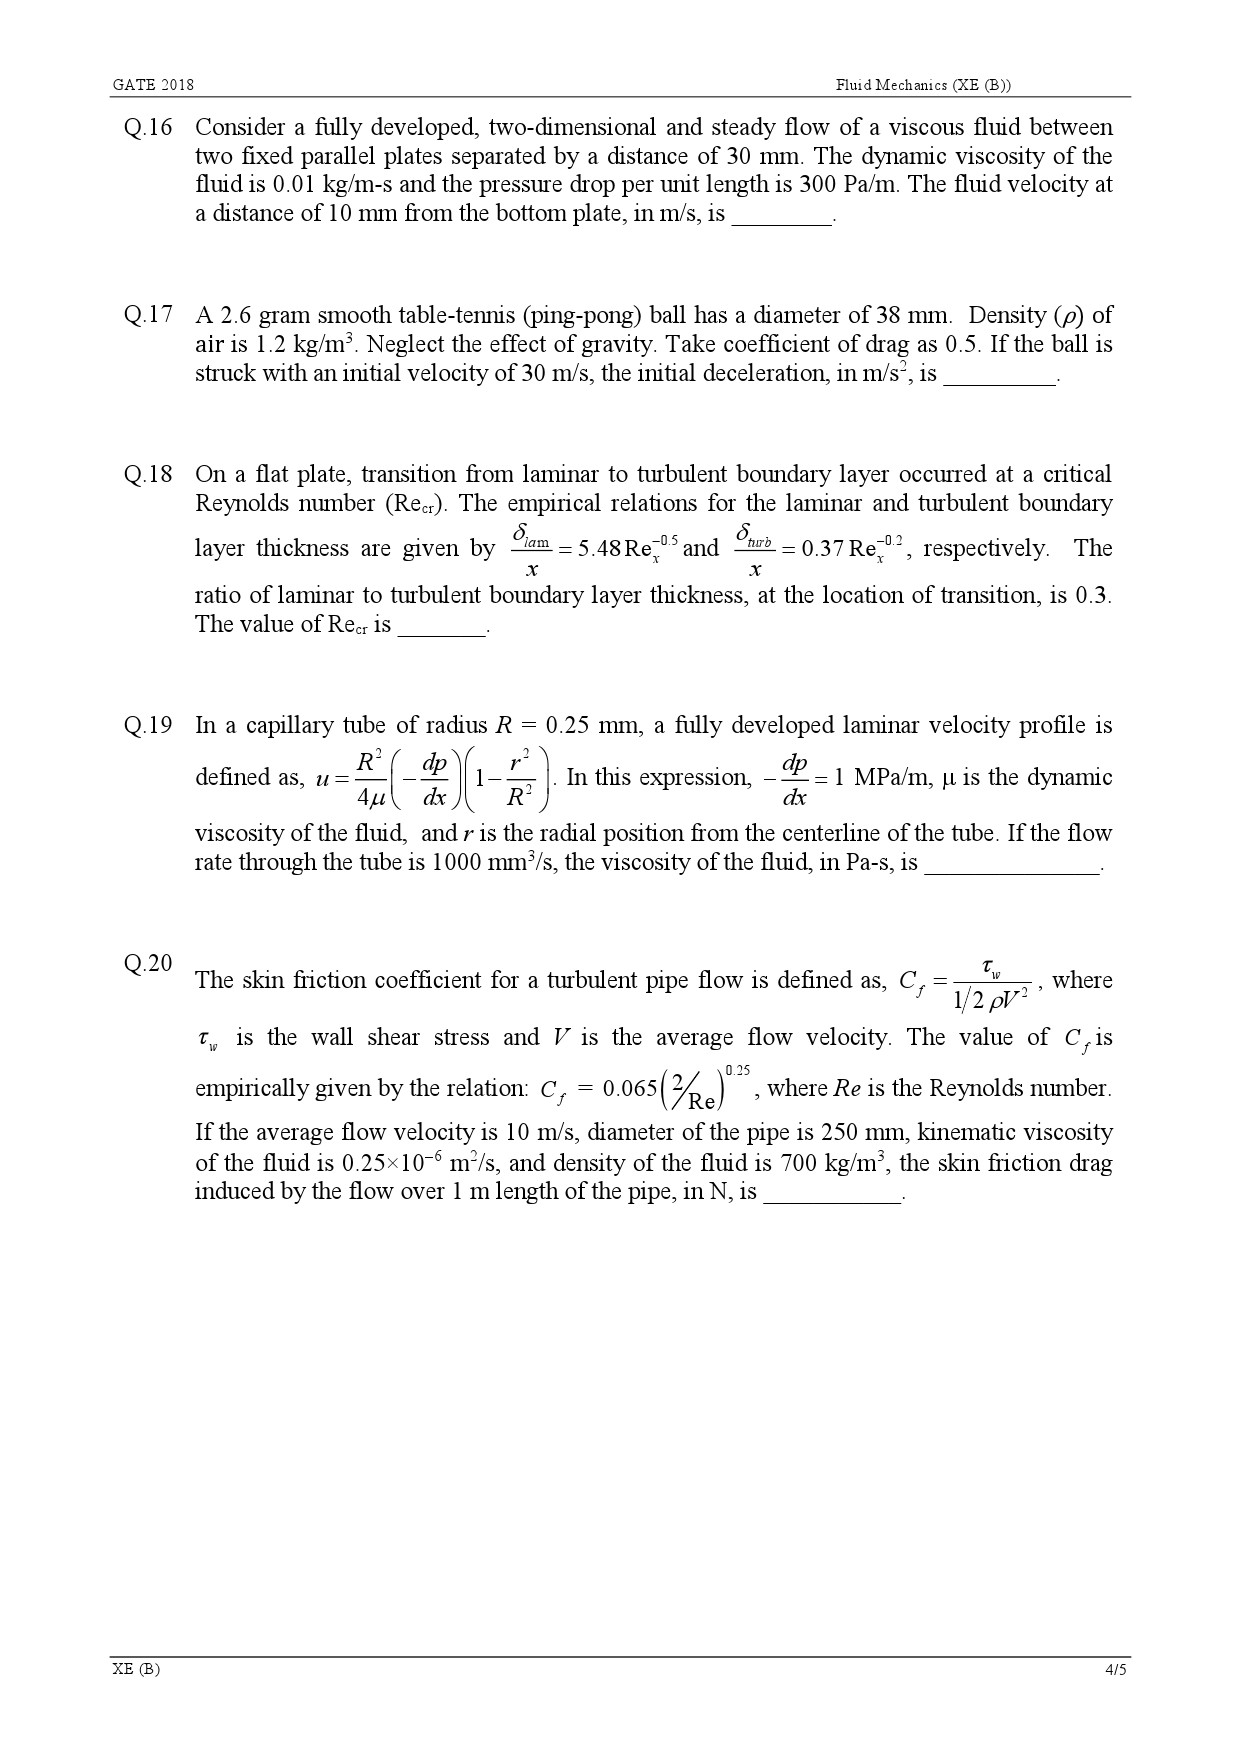 GATE Exam Question Paper 2018 Engineering Sciences 8